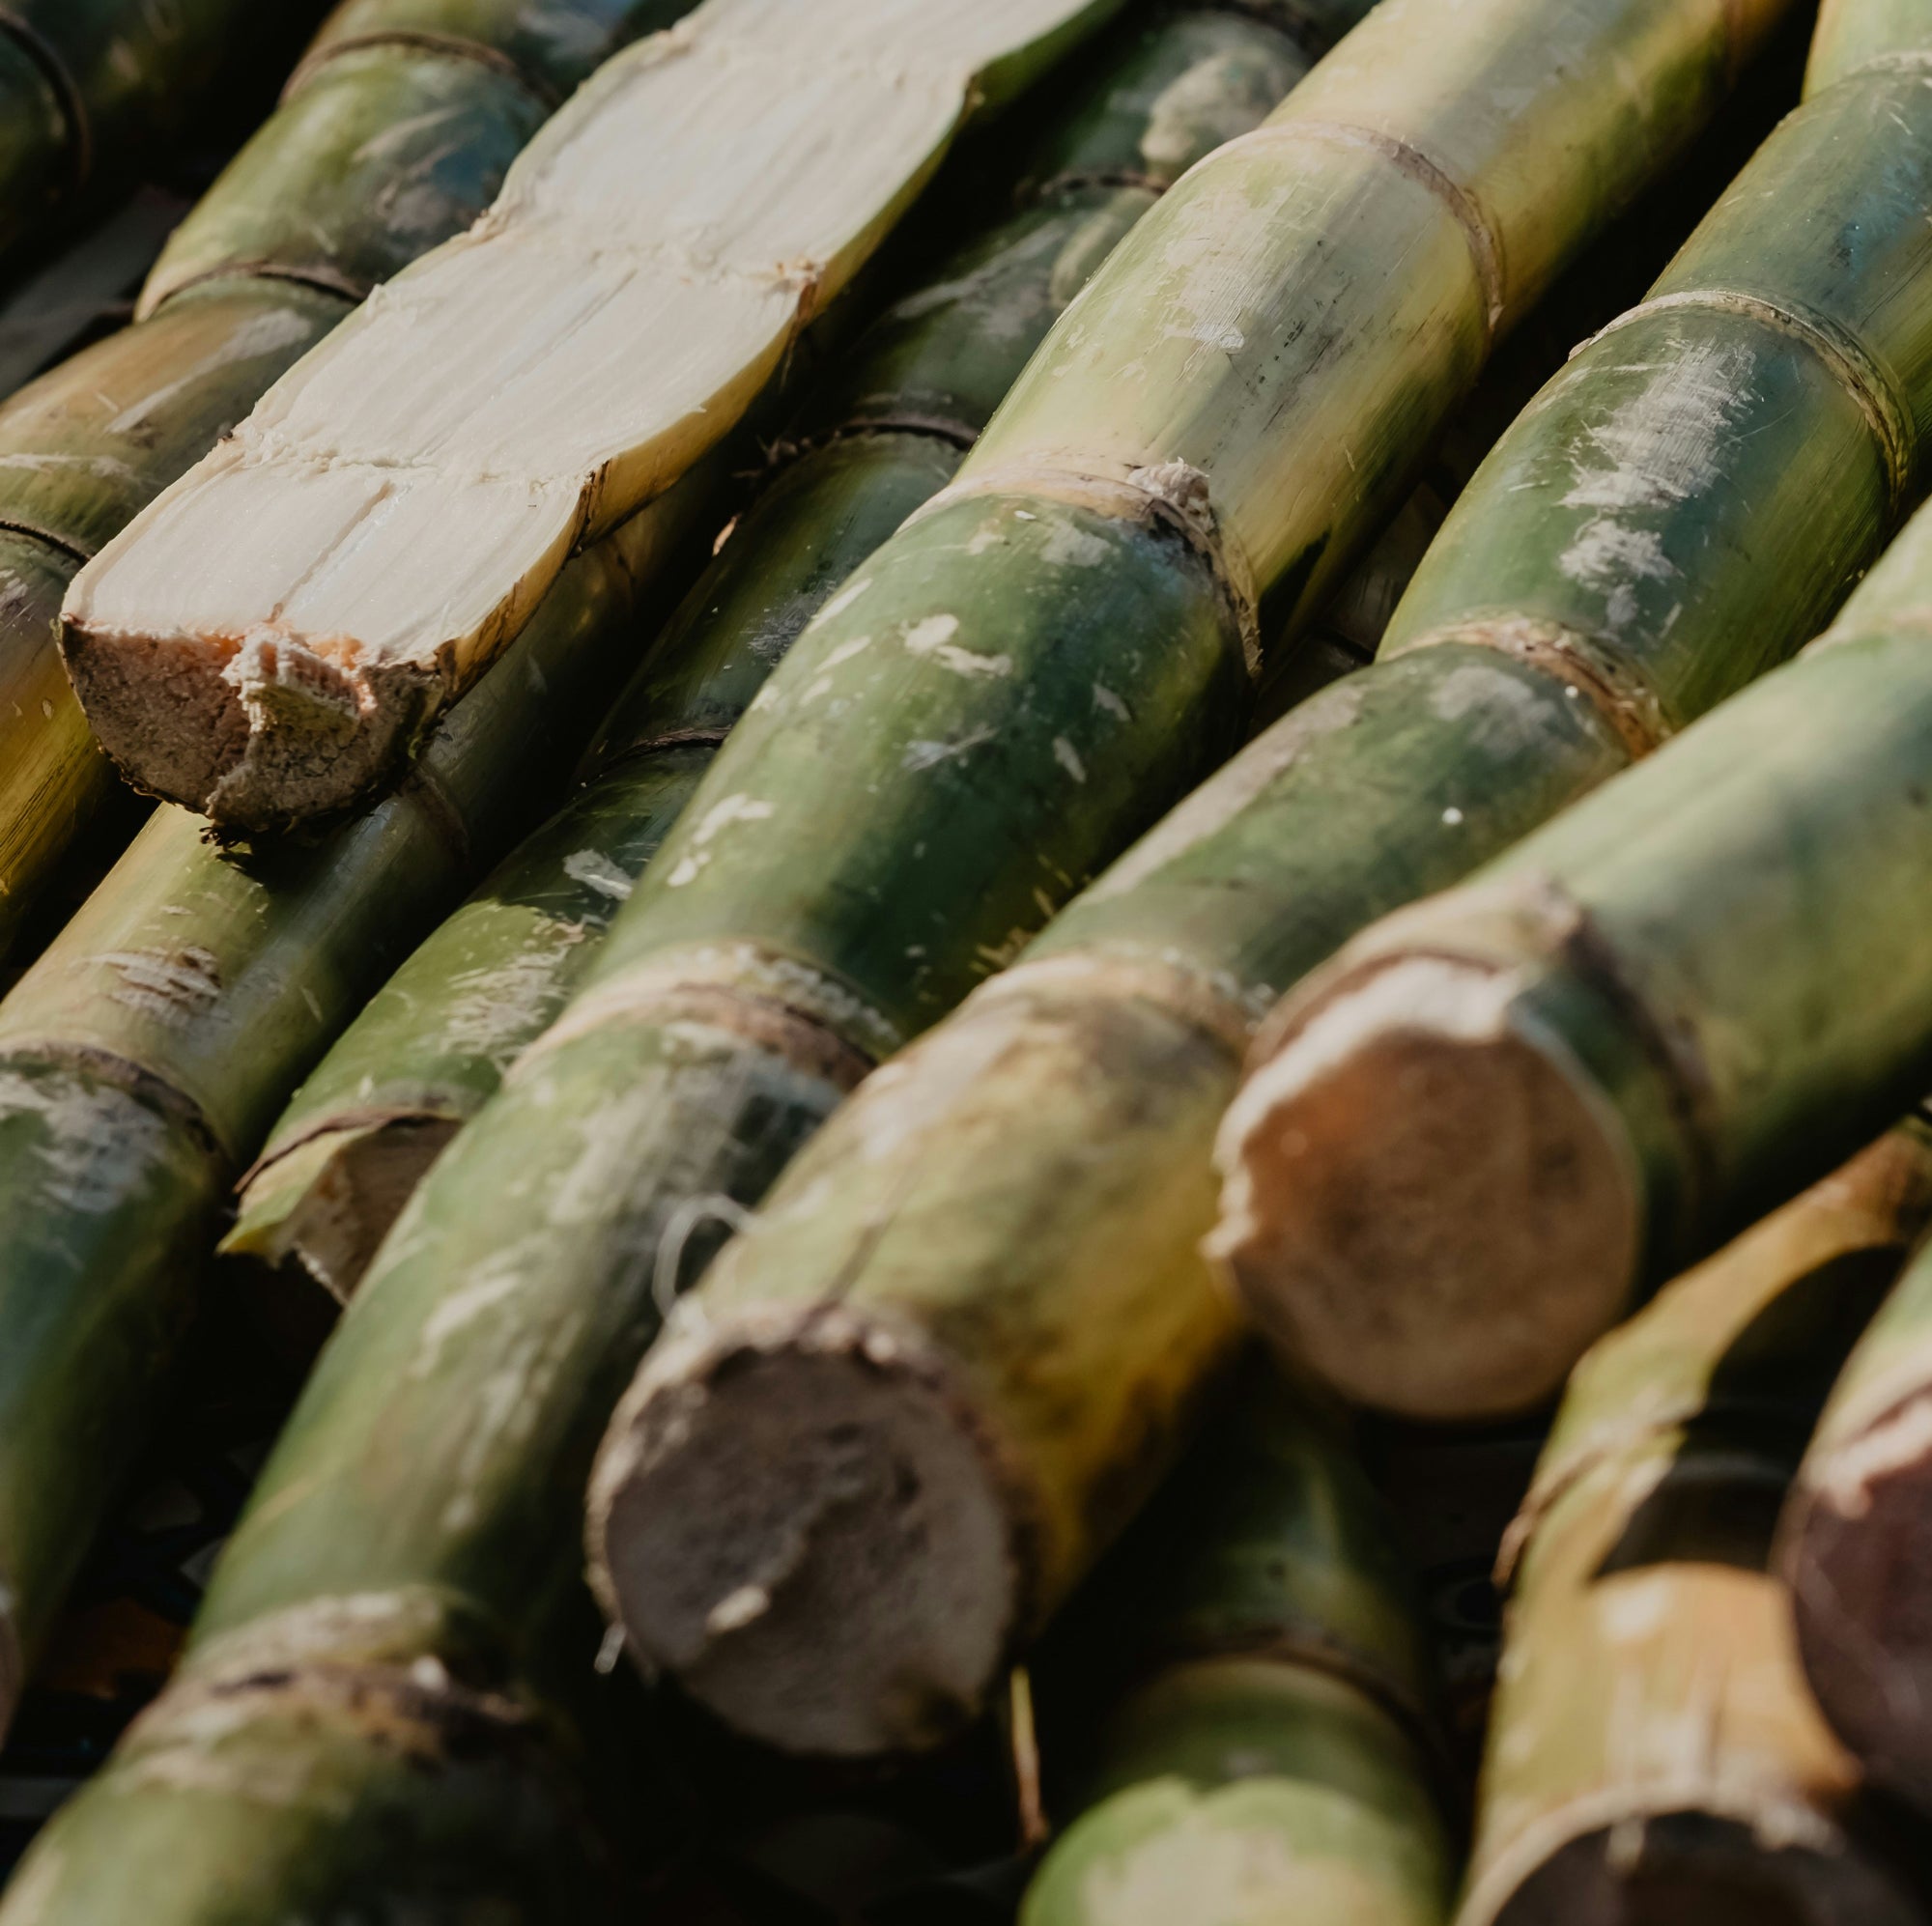 Bundles of freshly cut bamboo stalks with some ends exposed, showcasing the natural texture and greenish-yellow color. The stalks lie in various directions, highlighting their sturdy and fibrous nature.